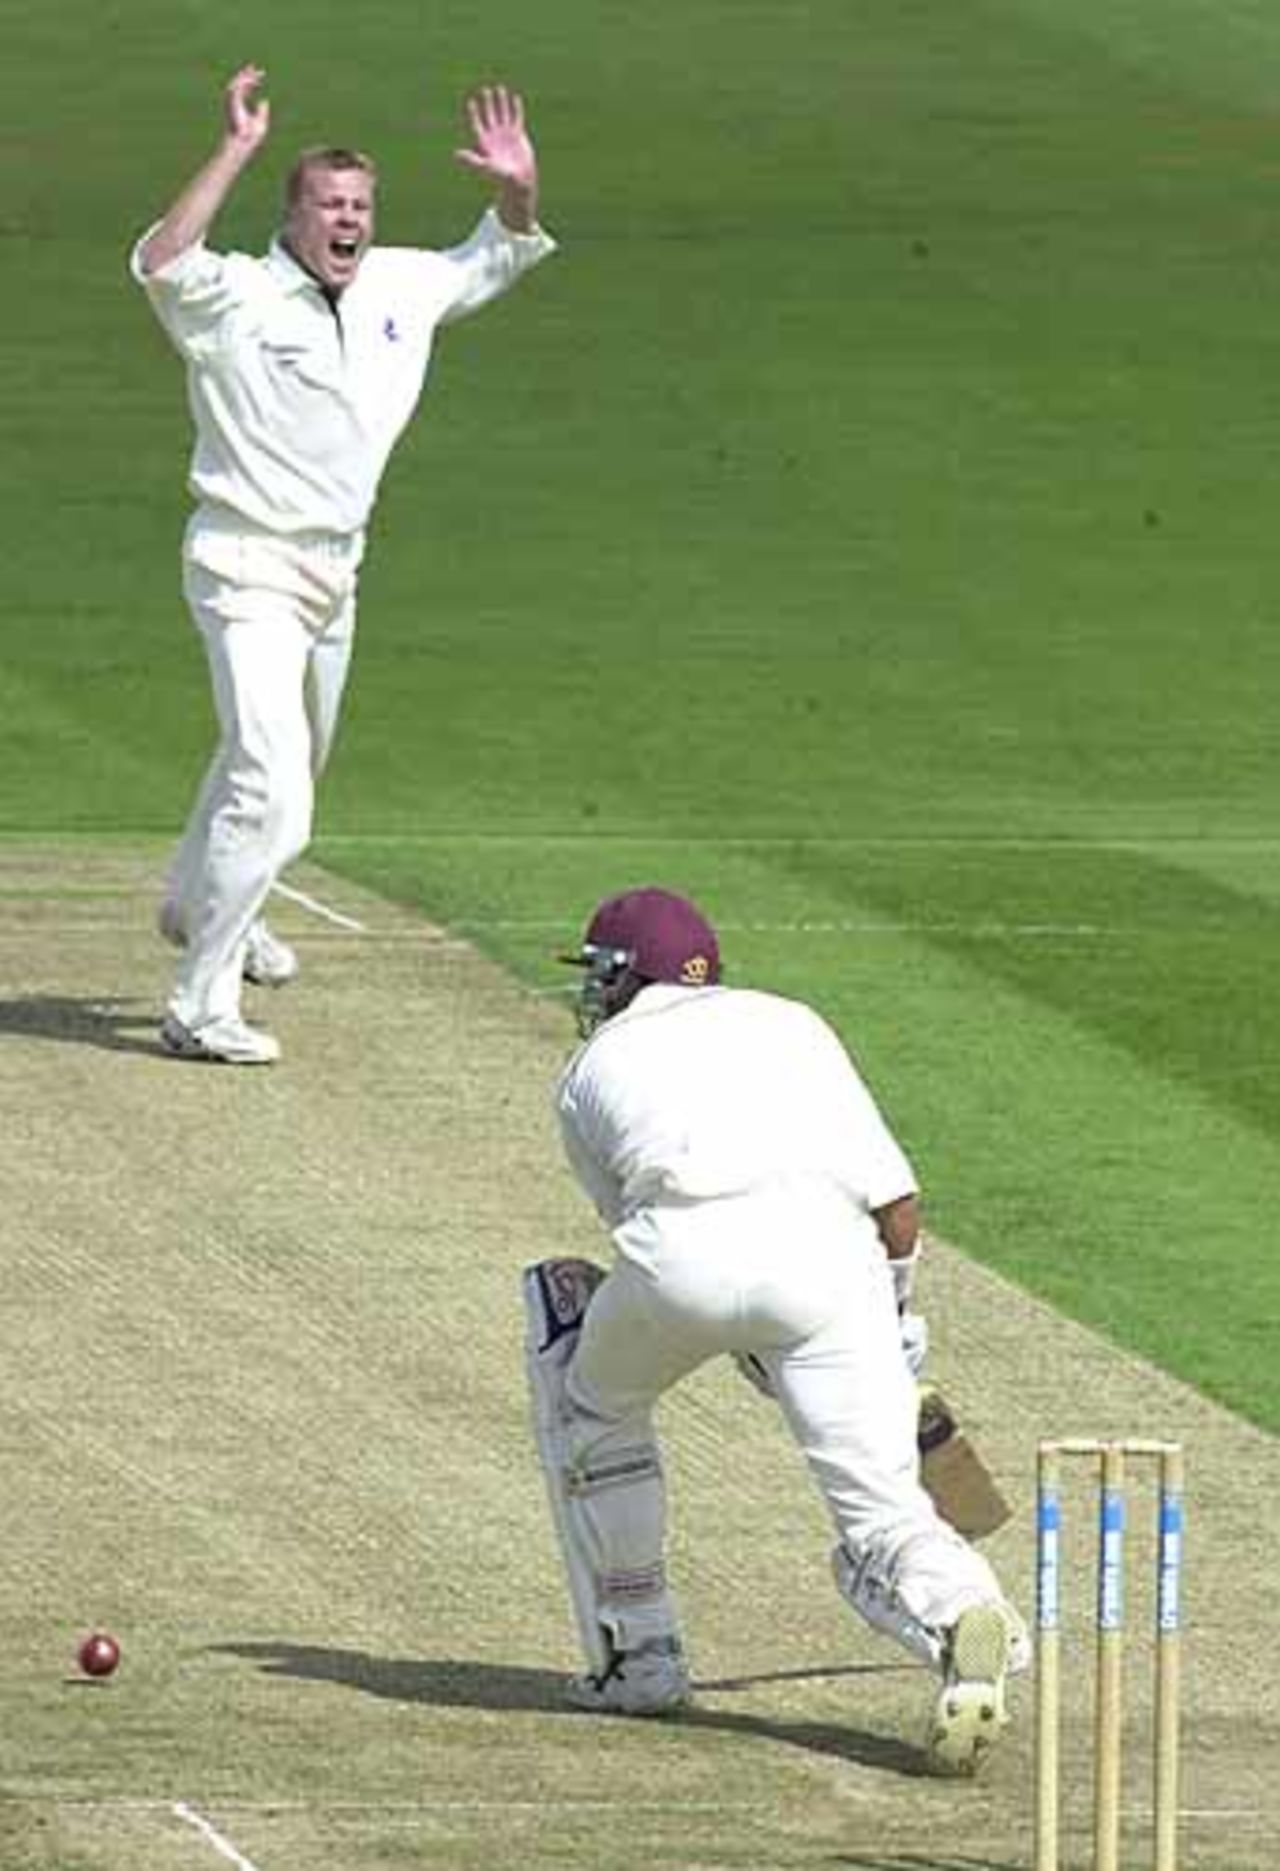 Martin Saggers with an lbw shout against Hussey, but not out, CricInfo Championship, 8th August 2001